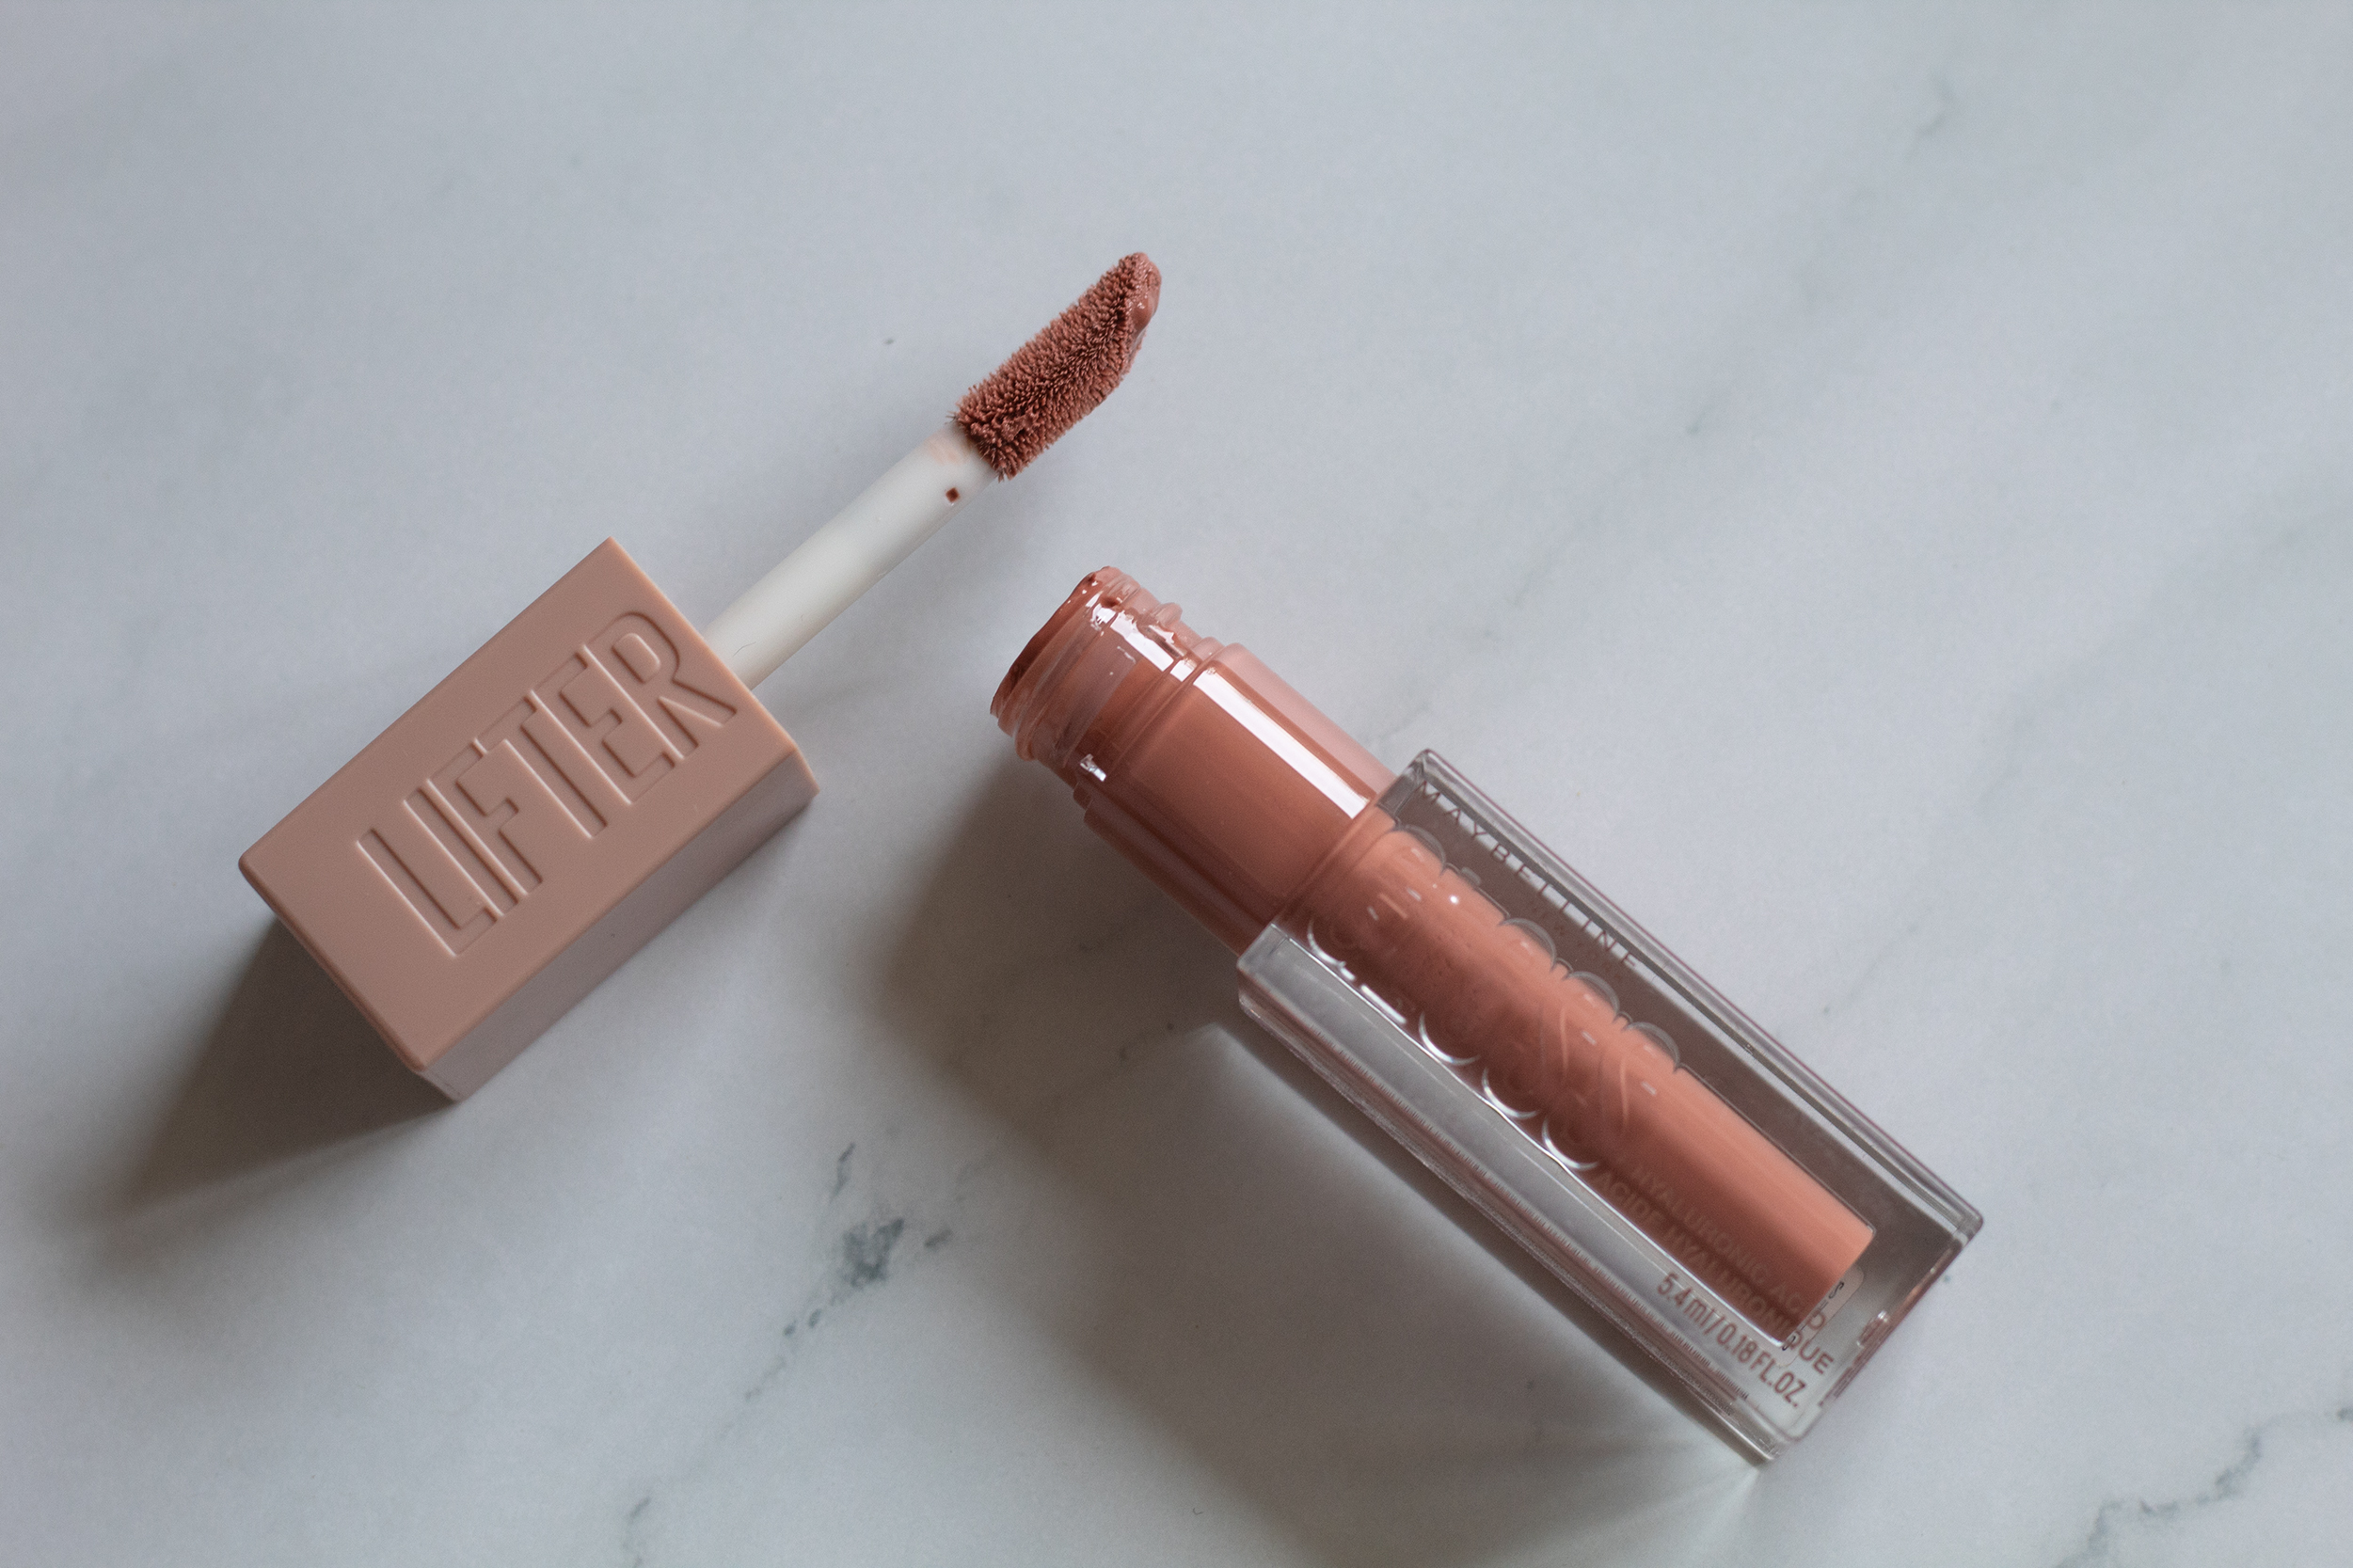 Lifter gloss from Maybelline in a nude brown shade against a white marble background